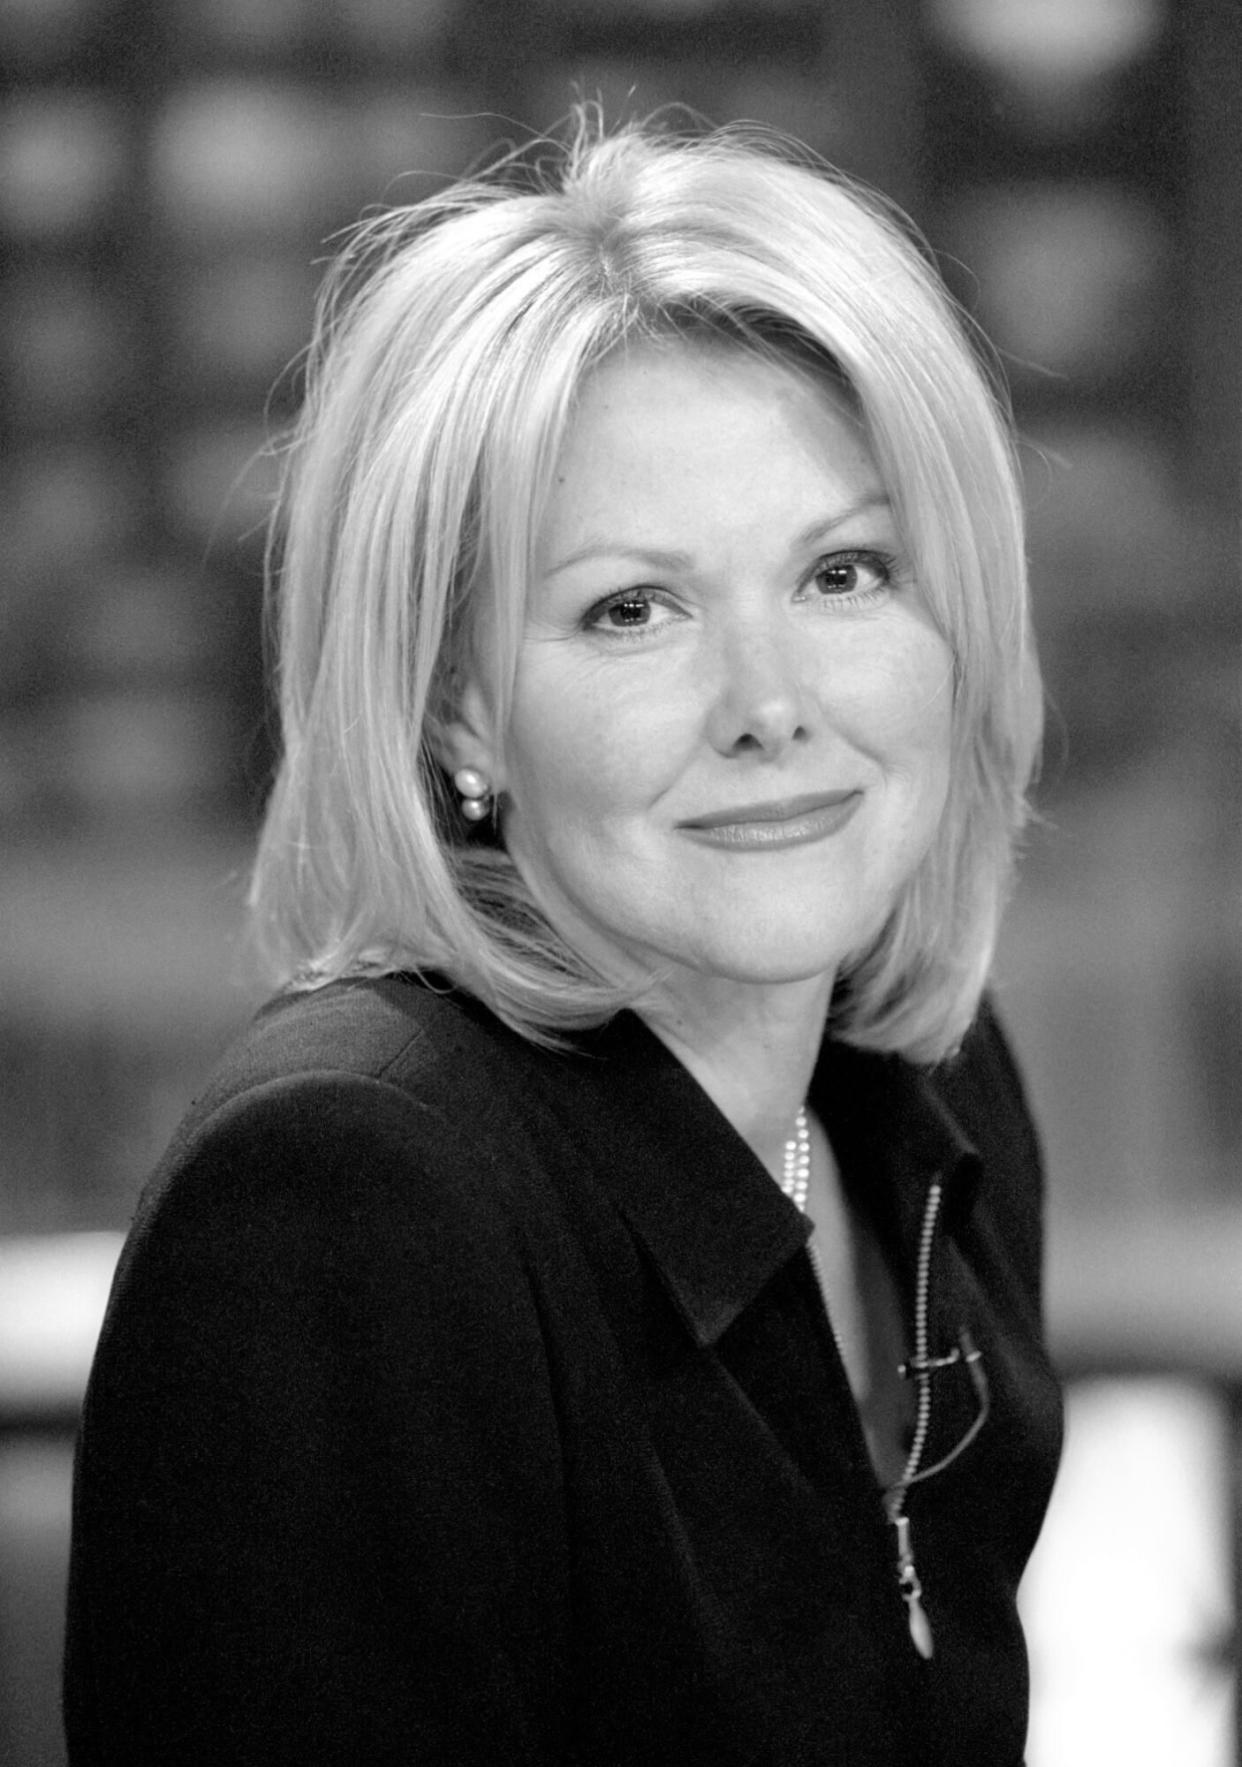 TV/Rieger 06/4/03 Susan Biddle/TWP Wendy Rieger is a WRC news anchor, broadcasting the news at 5:00pm from NBC's offices on Nebraska Ave. (Photo by Susan Biddle/The The Washington Post via Getty Images)